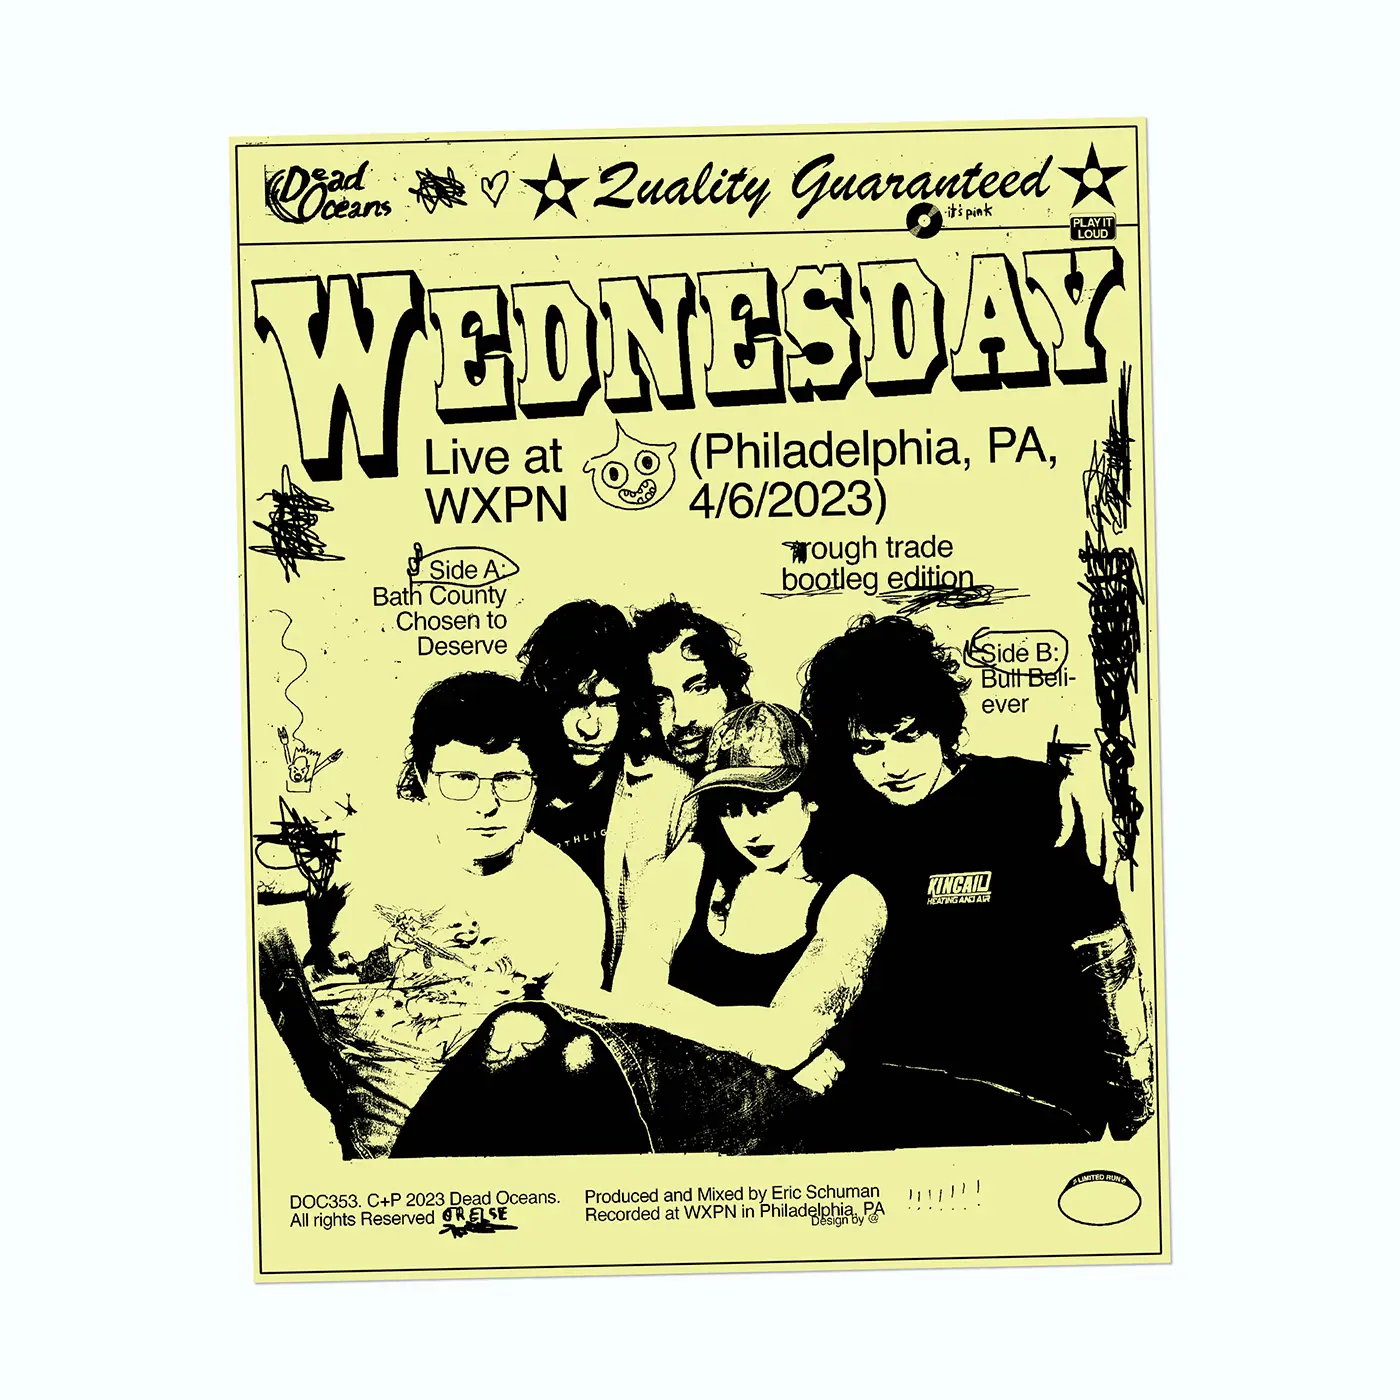 <strong>Wednesday - Live at WXPN (Philadelphia, PA, 4/6/2023)</strong> (Vinyl LP - pink)